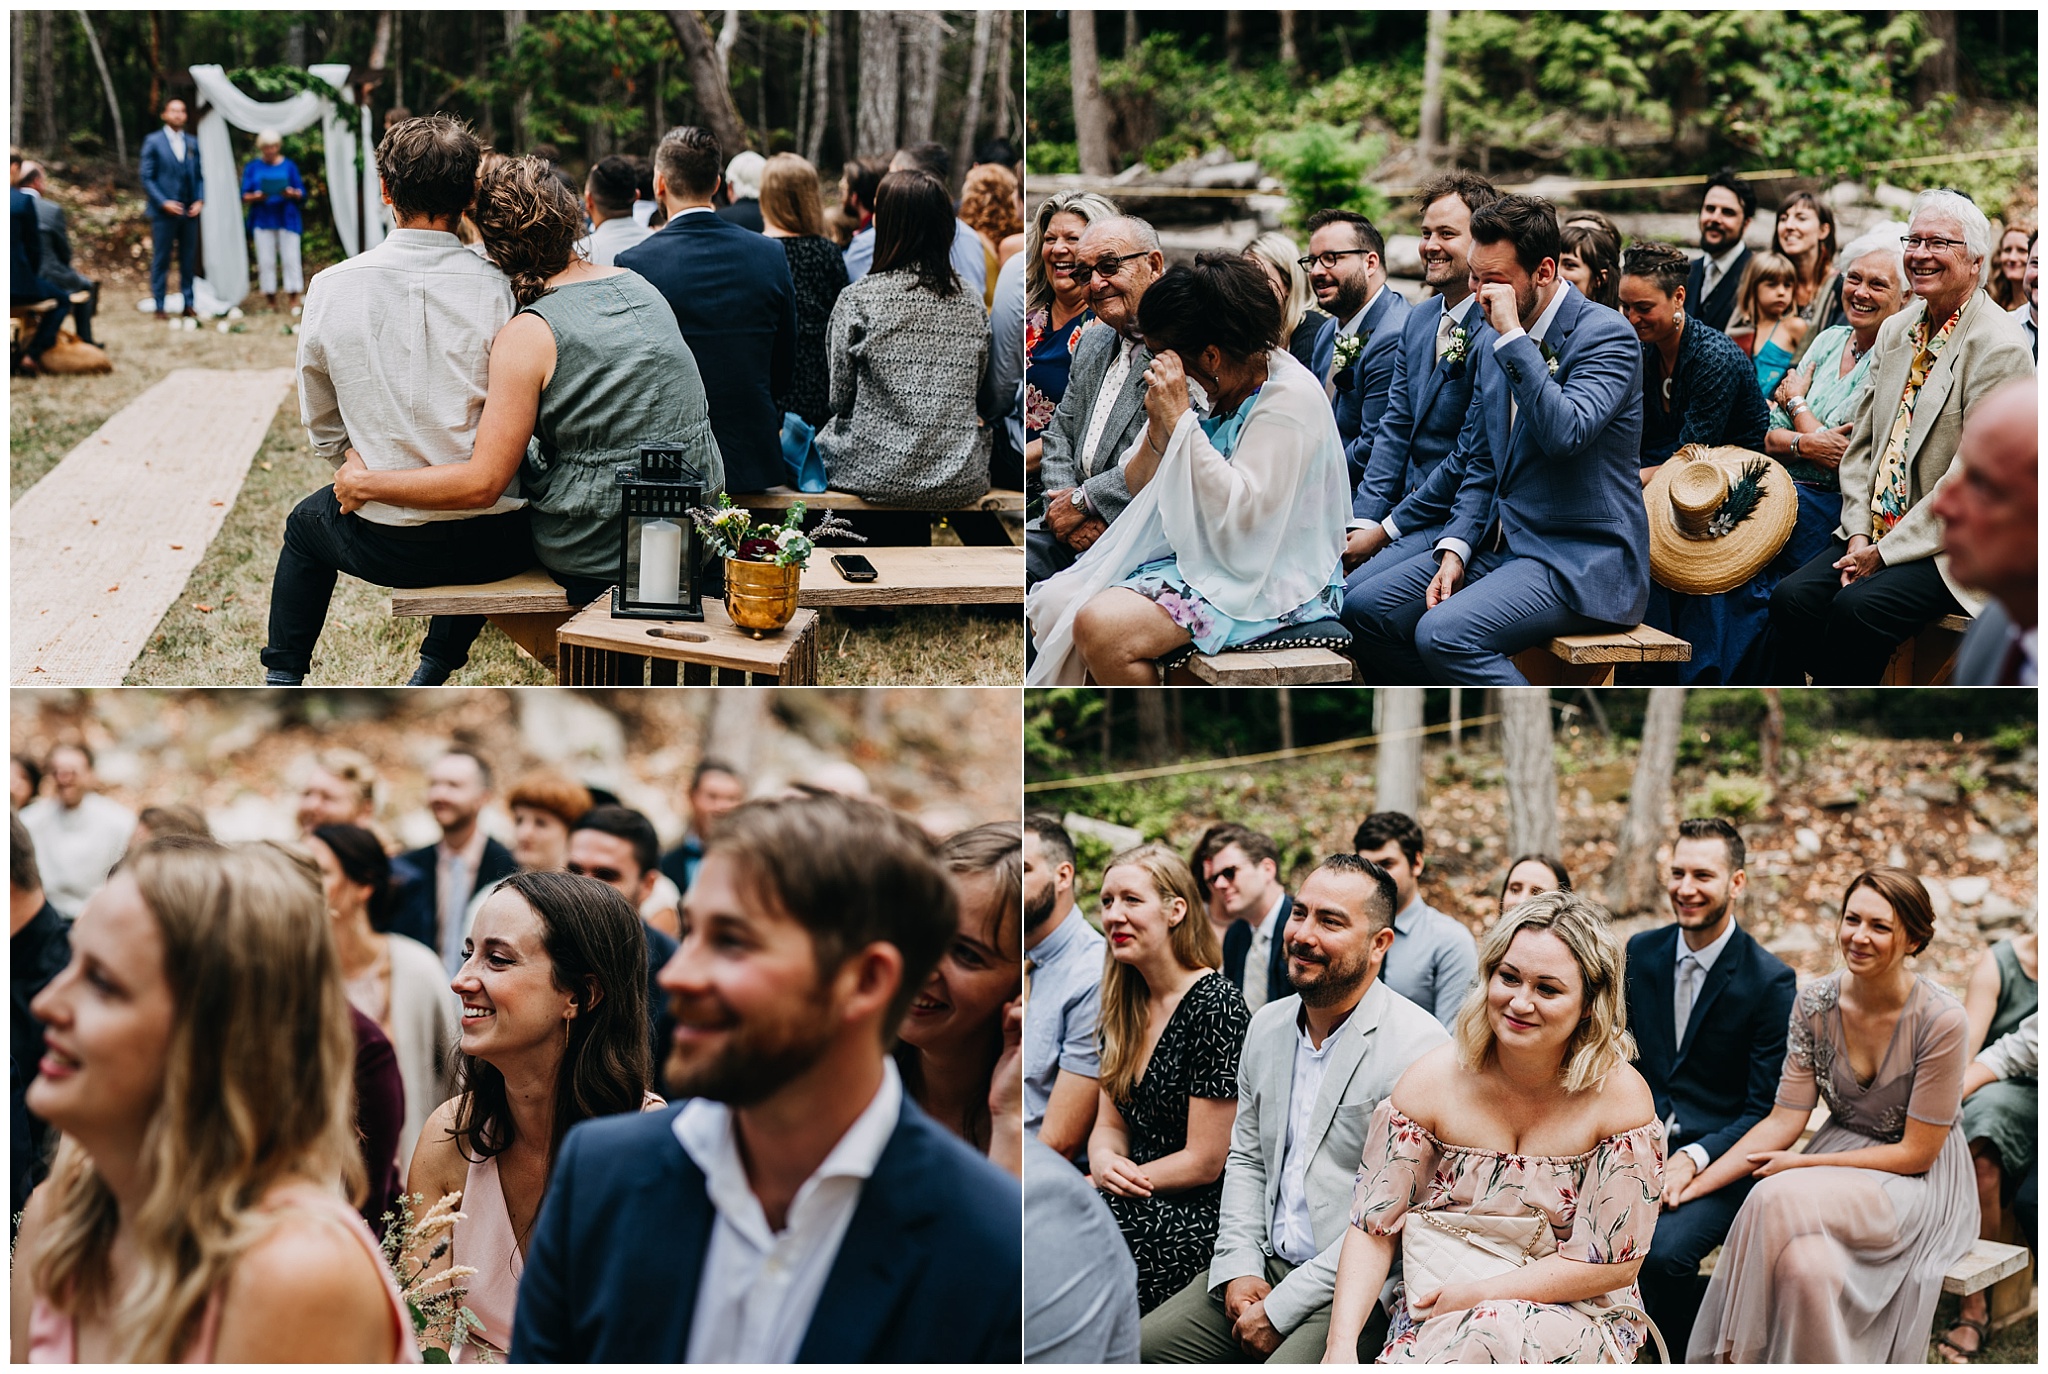 guests reaction at unplugged ceremony at intimate mayne island backyard wedding